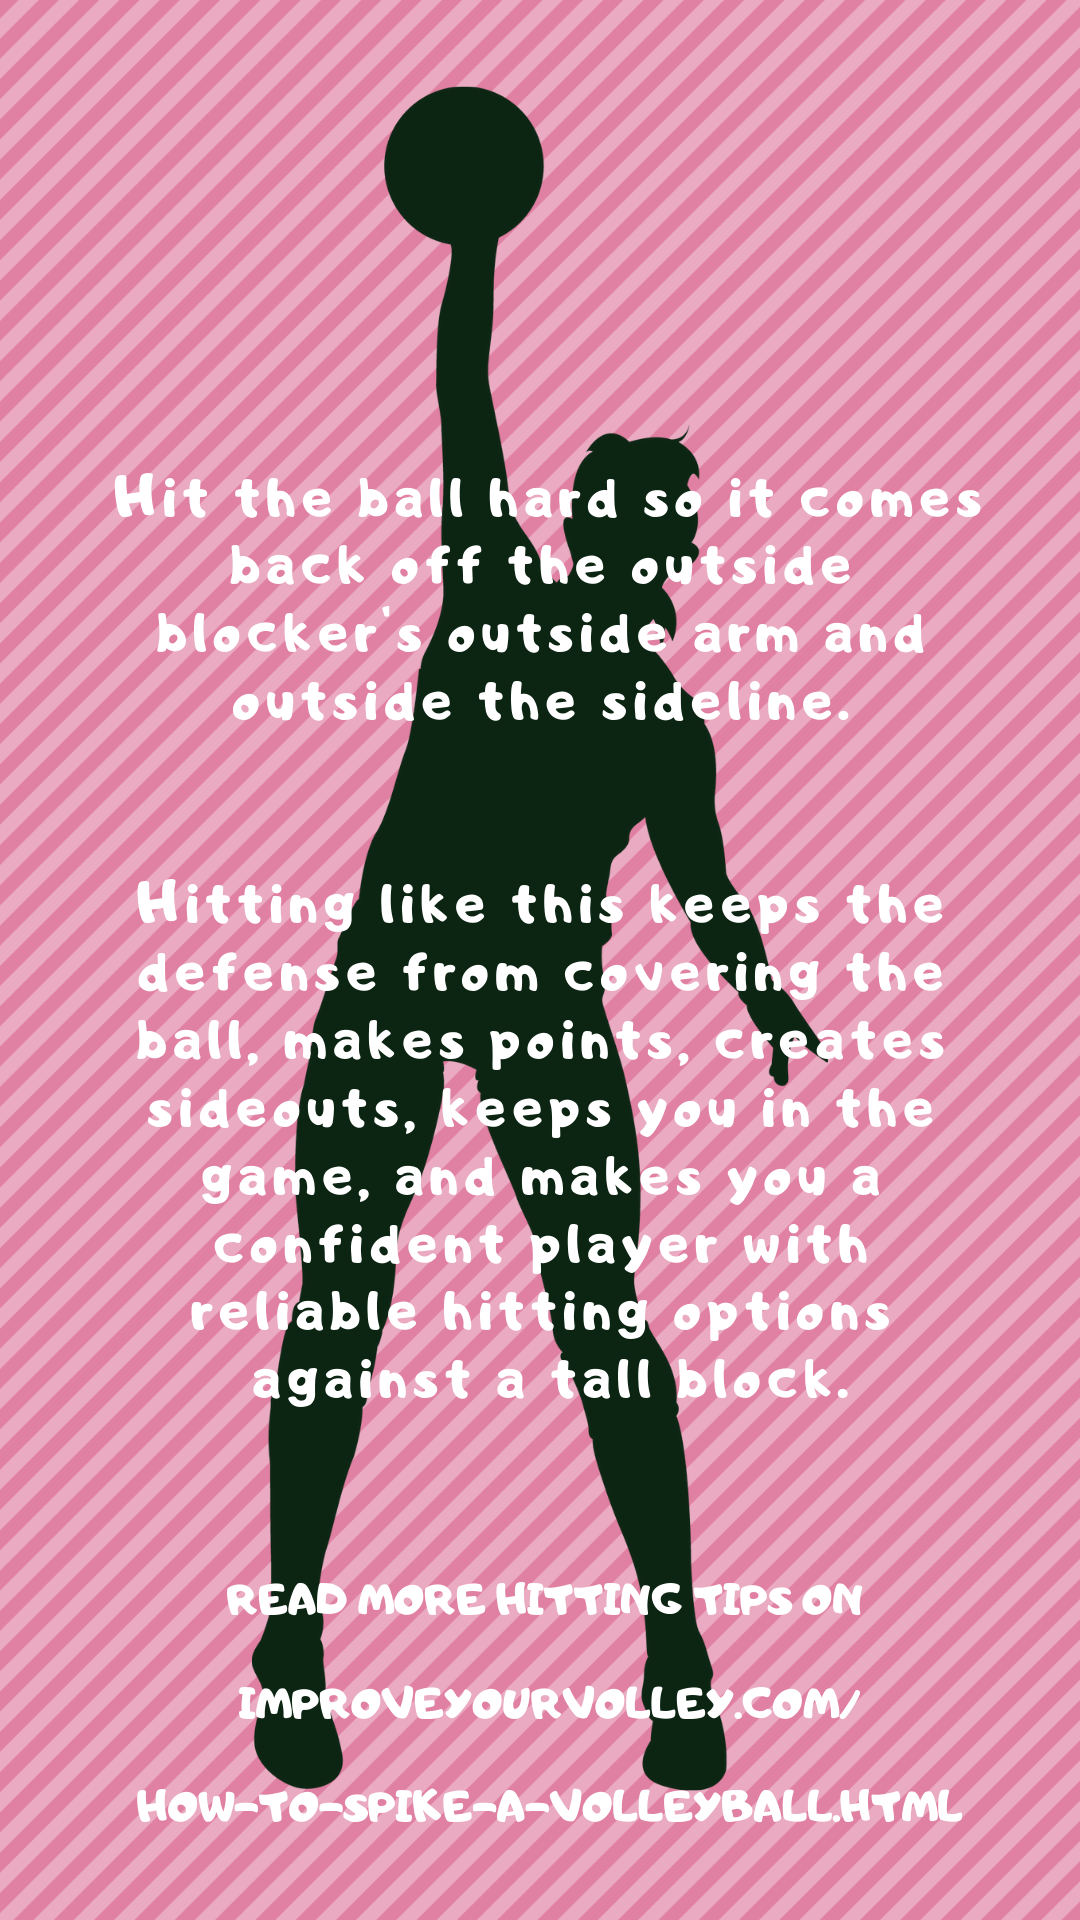 Hit the ball hard so it comes back off her arm and outside the sideline. Hitting like this keeps the defense from covering the ball, makes points, creates sideouts, keeps you in the game